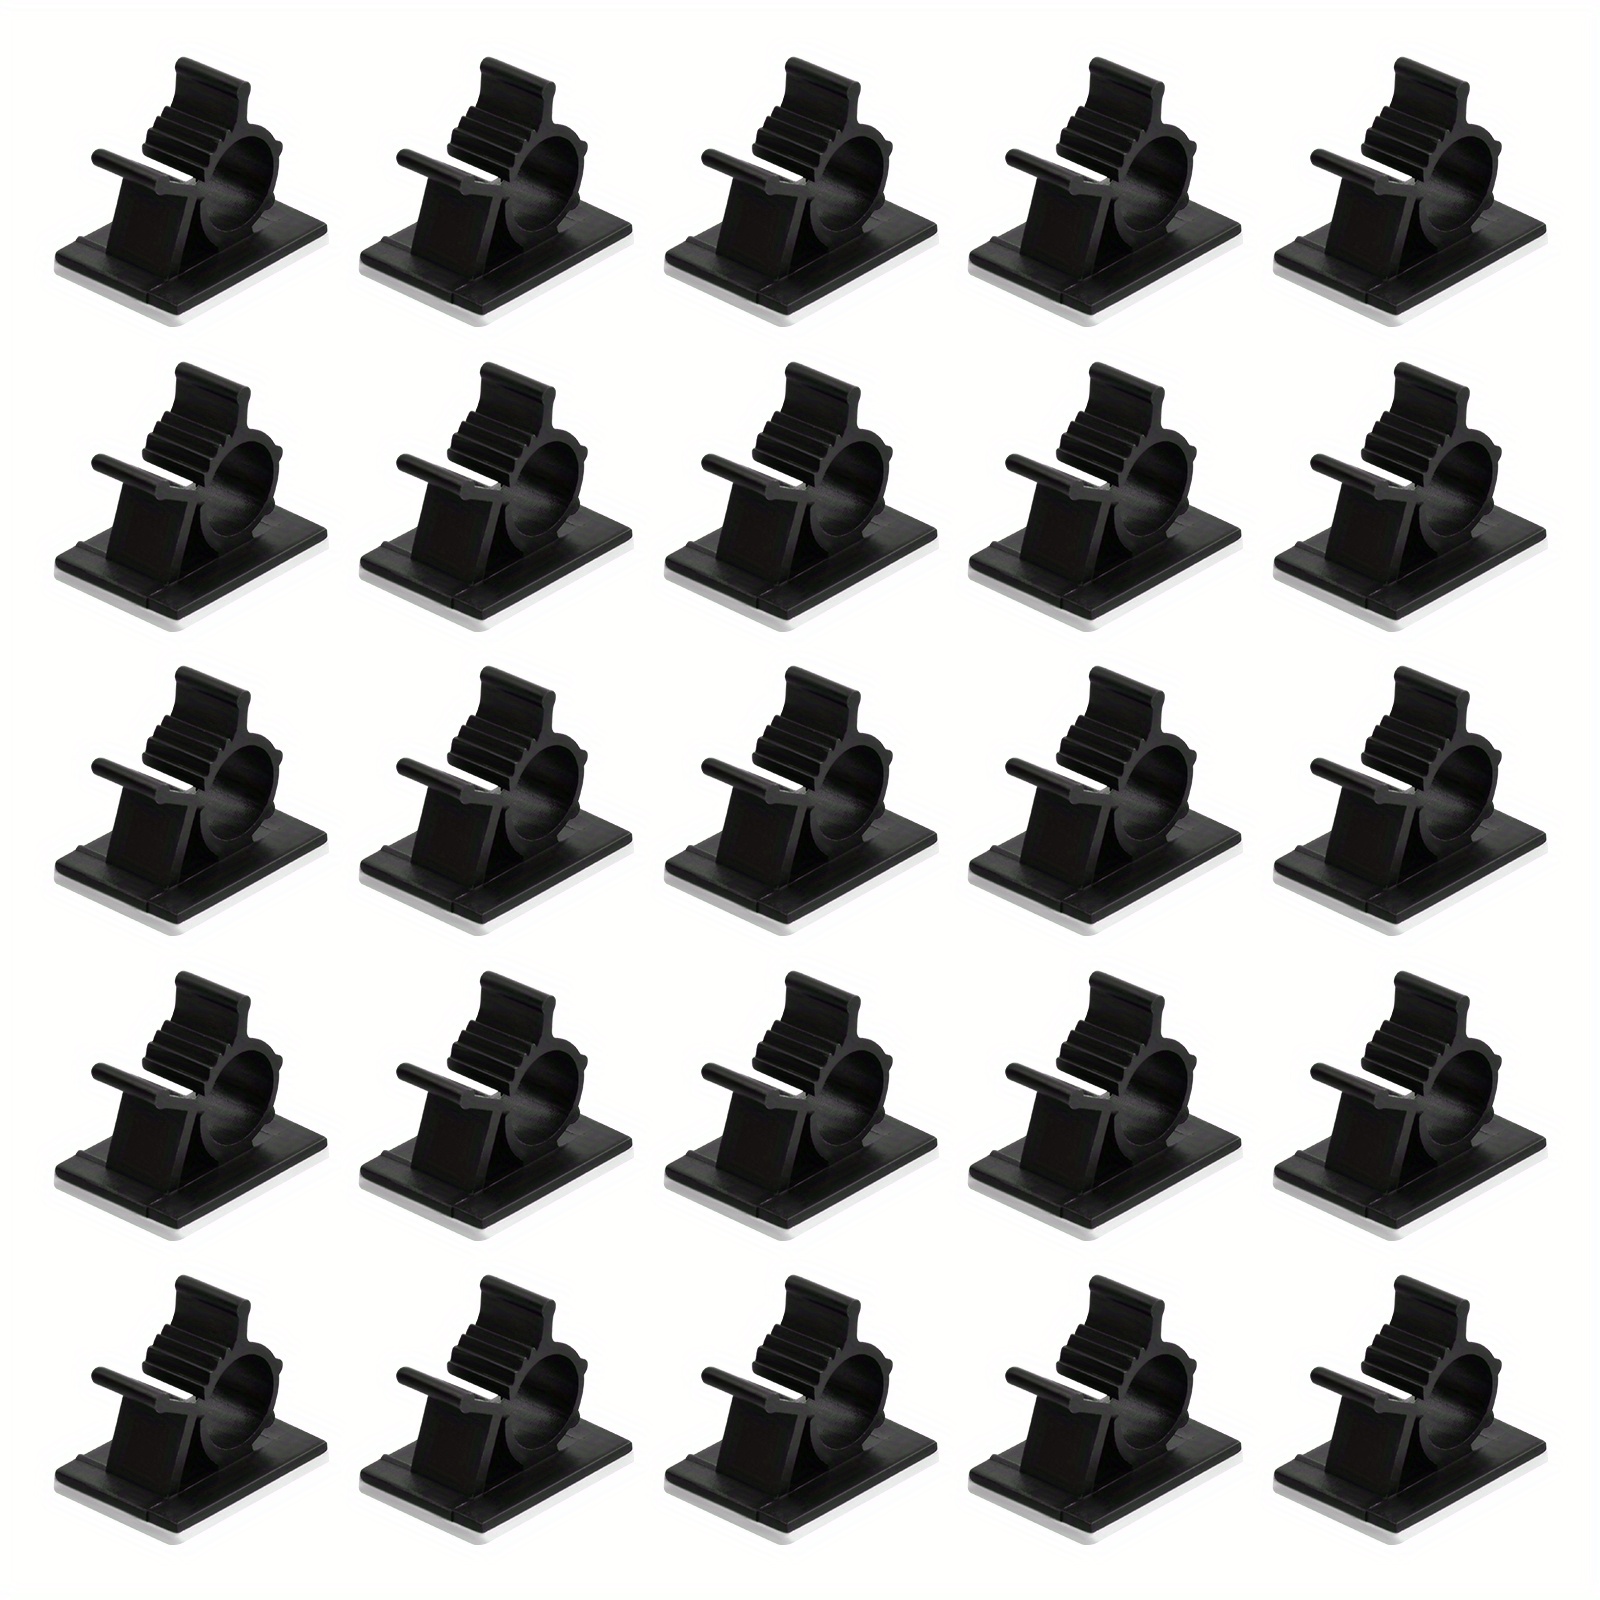 50pcs Self-Adhesive Cable Clamps, Electrical Cable Management Clips, Cable  Holder, Cable Clips, Self-Adhesive Cable Clamps, Desk Organizer, Black